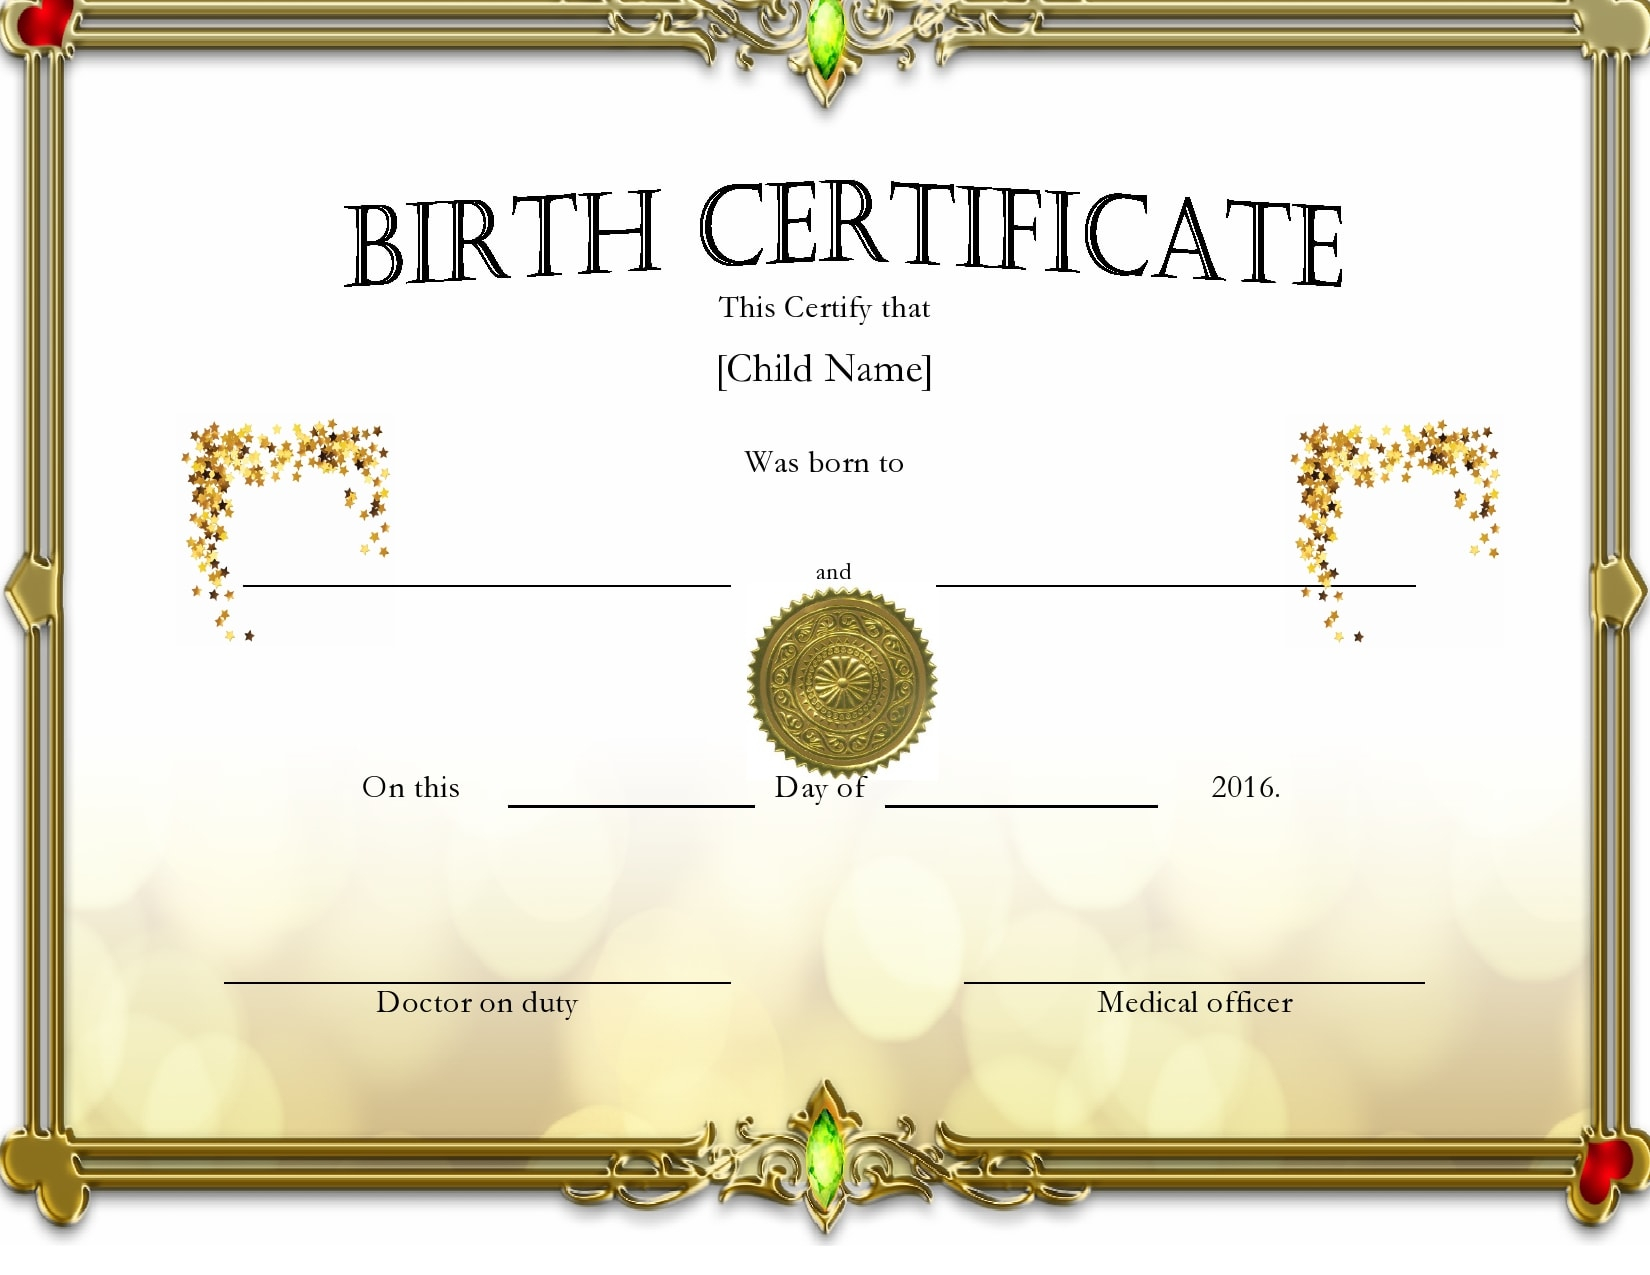 10 Blank Birth Certificate Templates (& Examples) – PrintableTemplates Throughout Birth Certificate Templates For Word